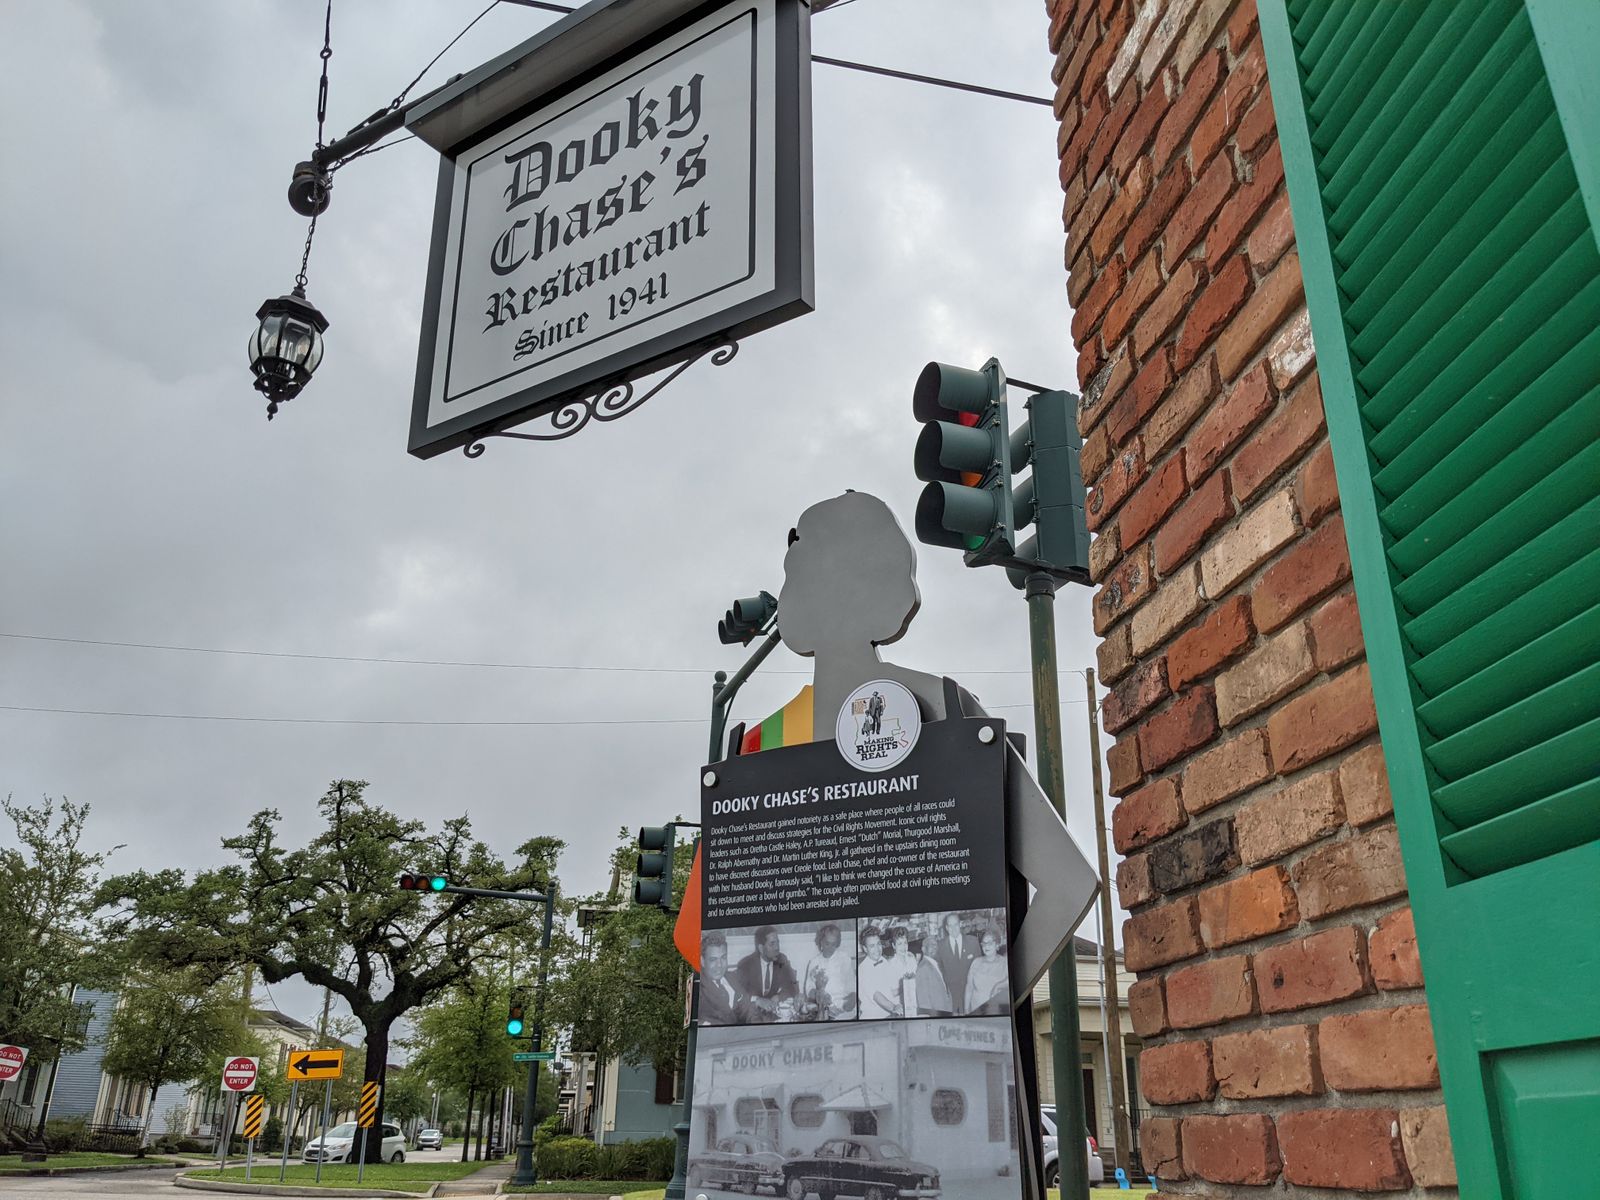 Louisiana Civil Rights Trail begins unveiling historical markers, Black Catholic history